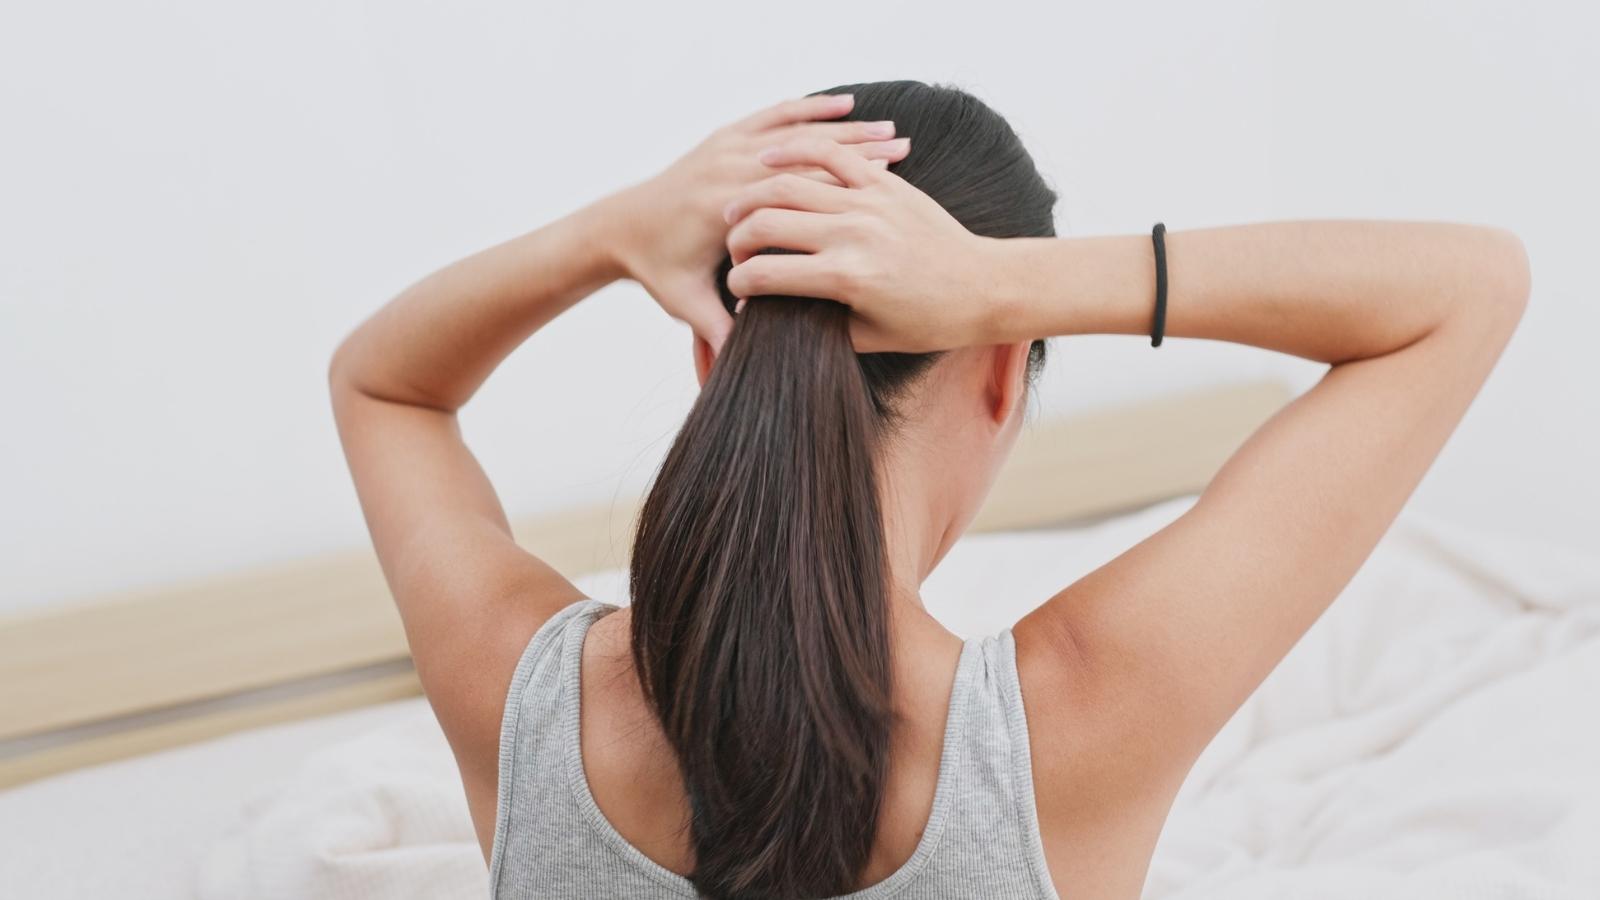 GREASY HAIR: WHAT CAUSES IT AND HOW TO PREVENT IT